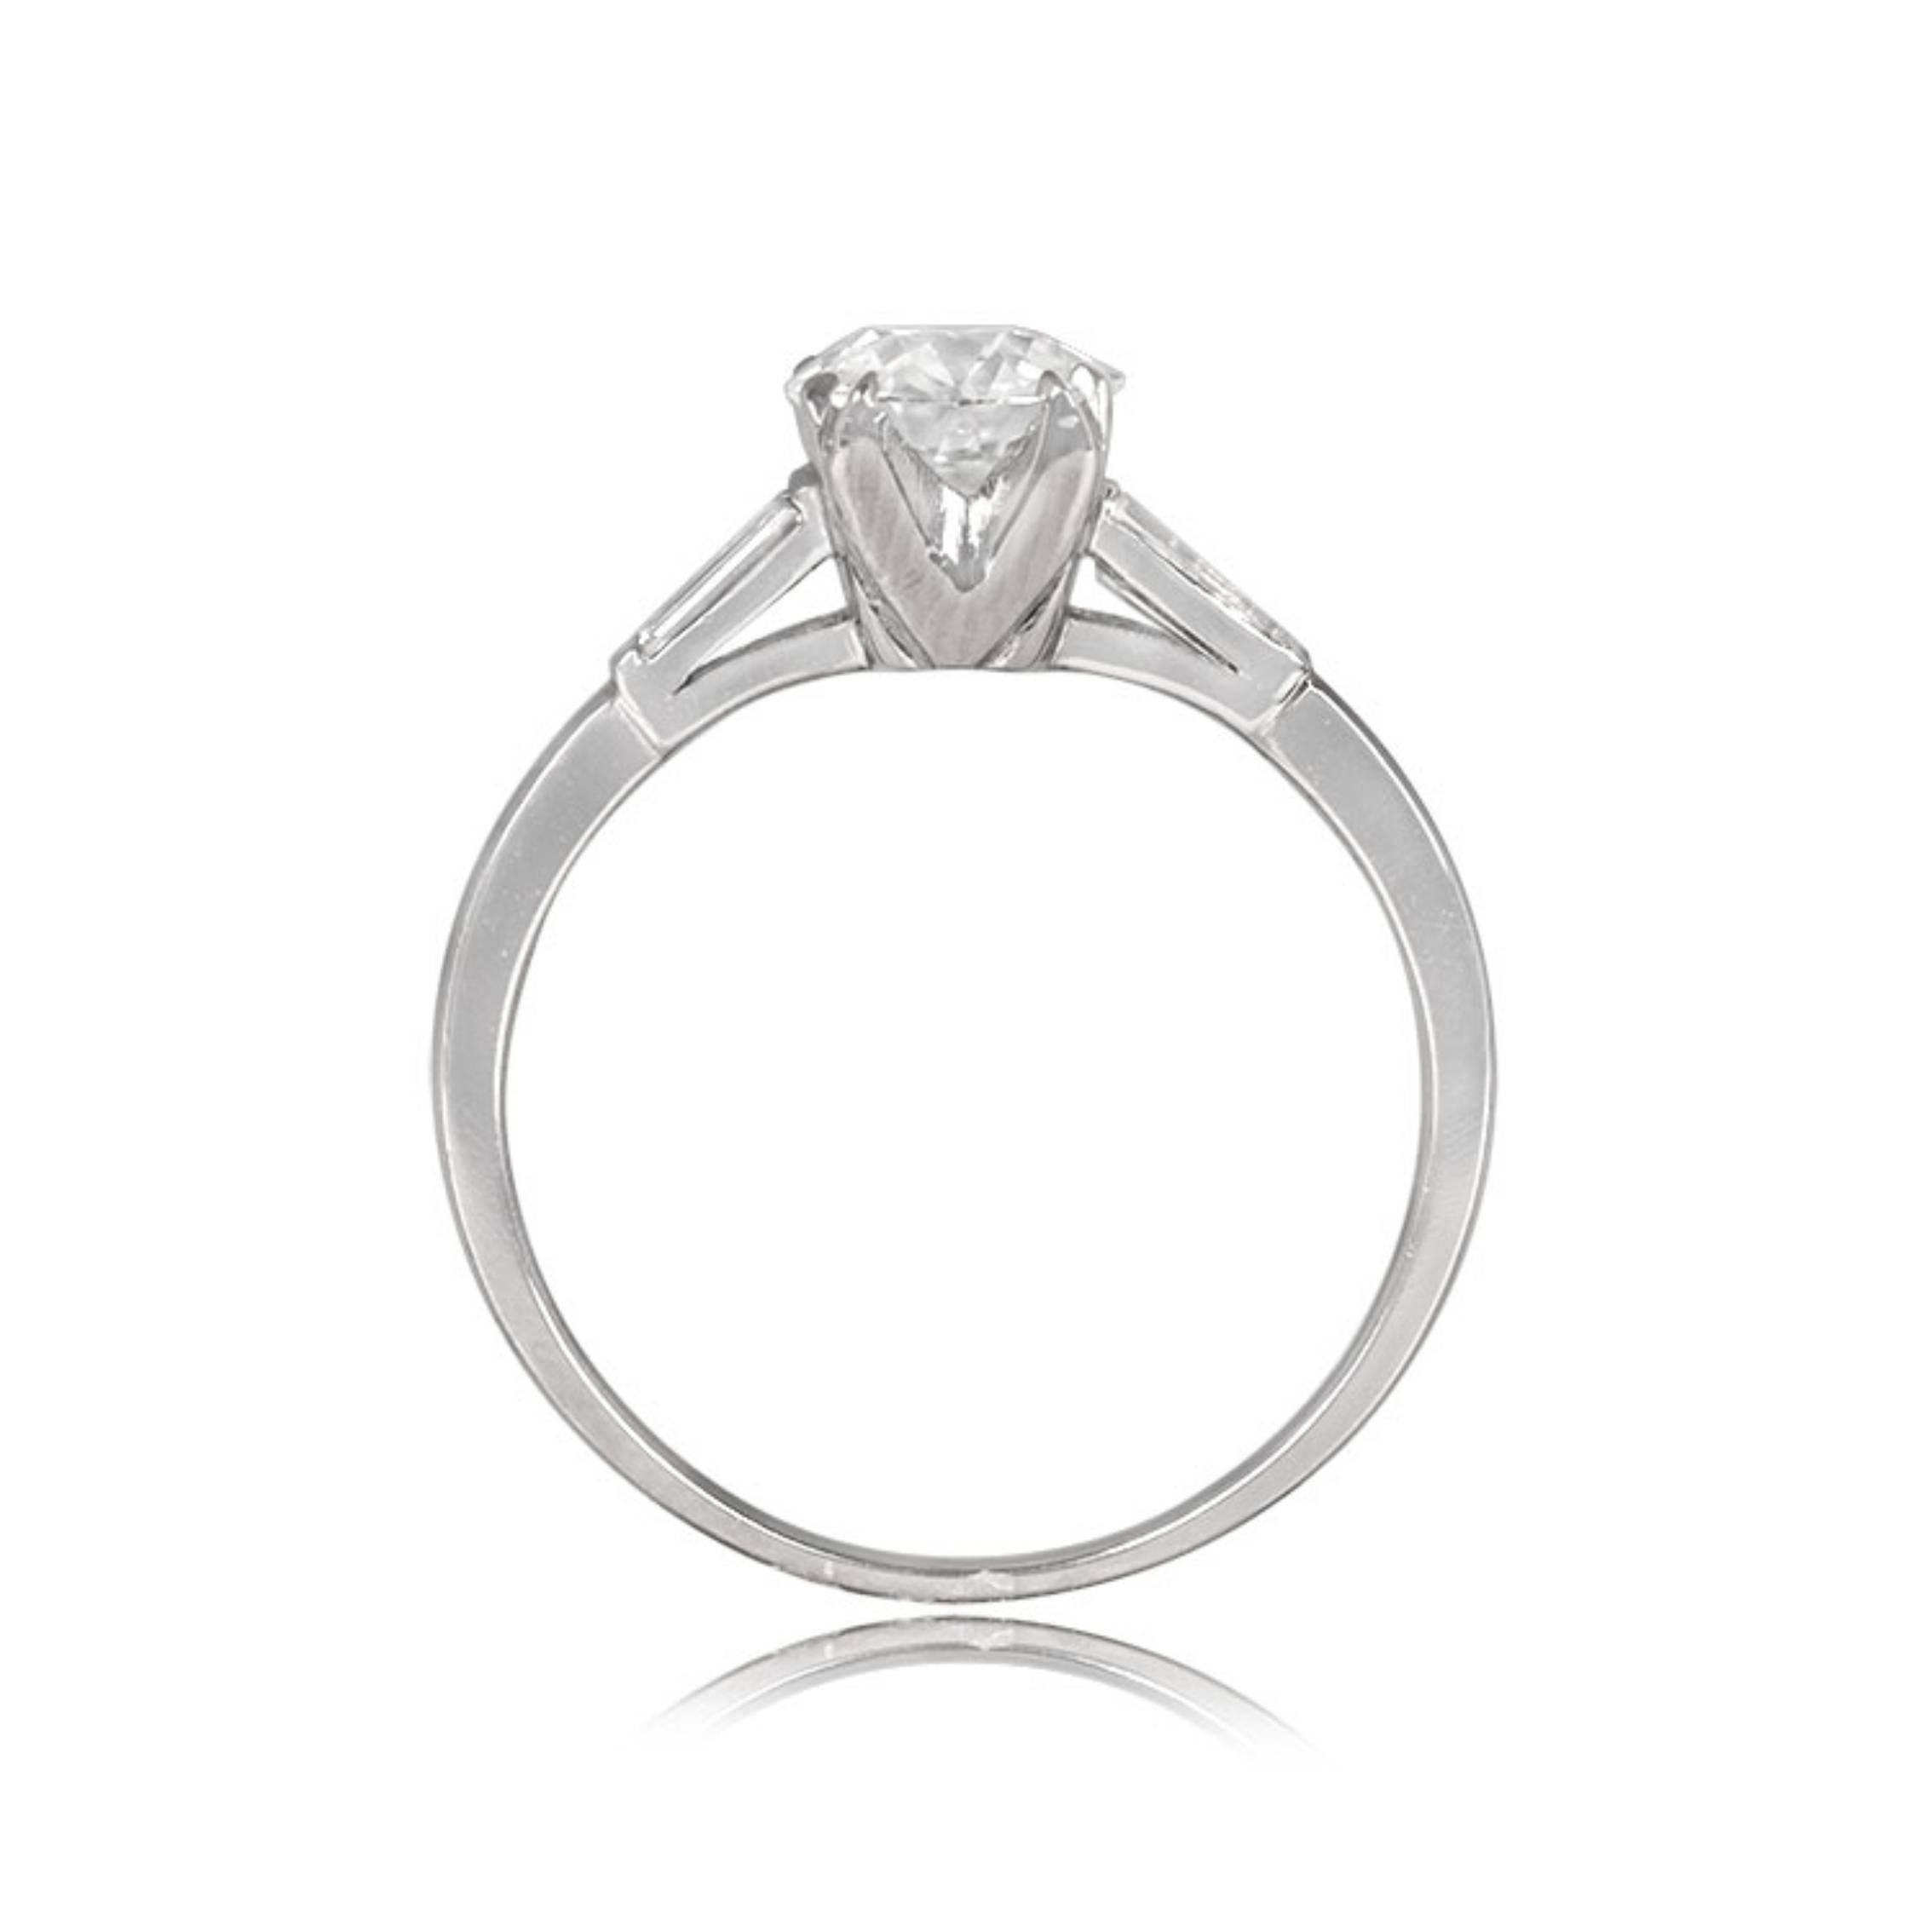 A captivating vintage engagement ring featuring a GIA-certified old European cut diamond from the 1920s, set in prongs. The center diamond, 0.76 carats, I color, and SI1 clarity exudes timeless elegance. On the shoulders, two tapered baguette-cut